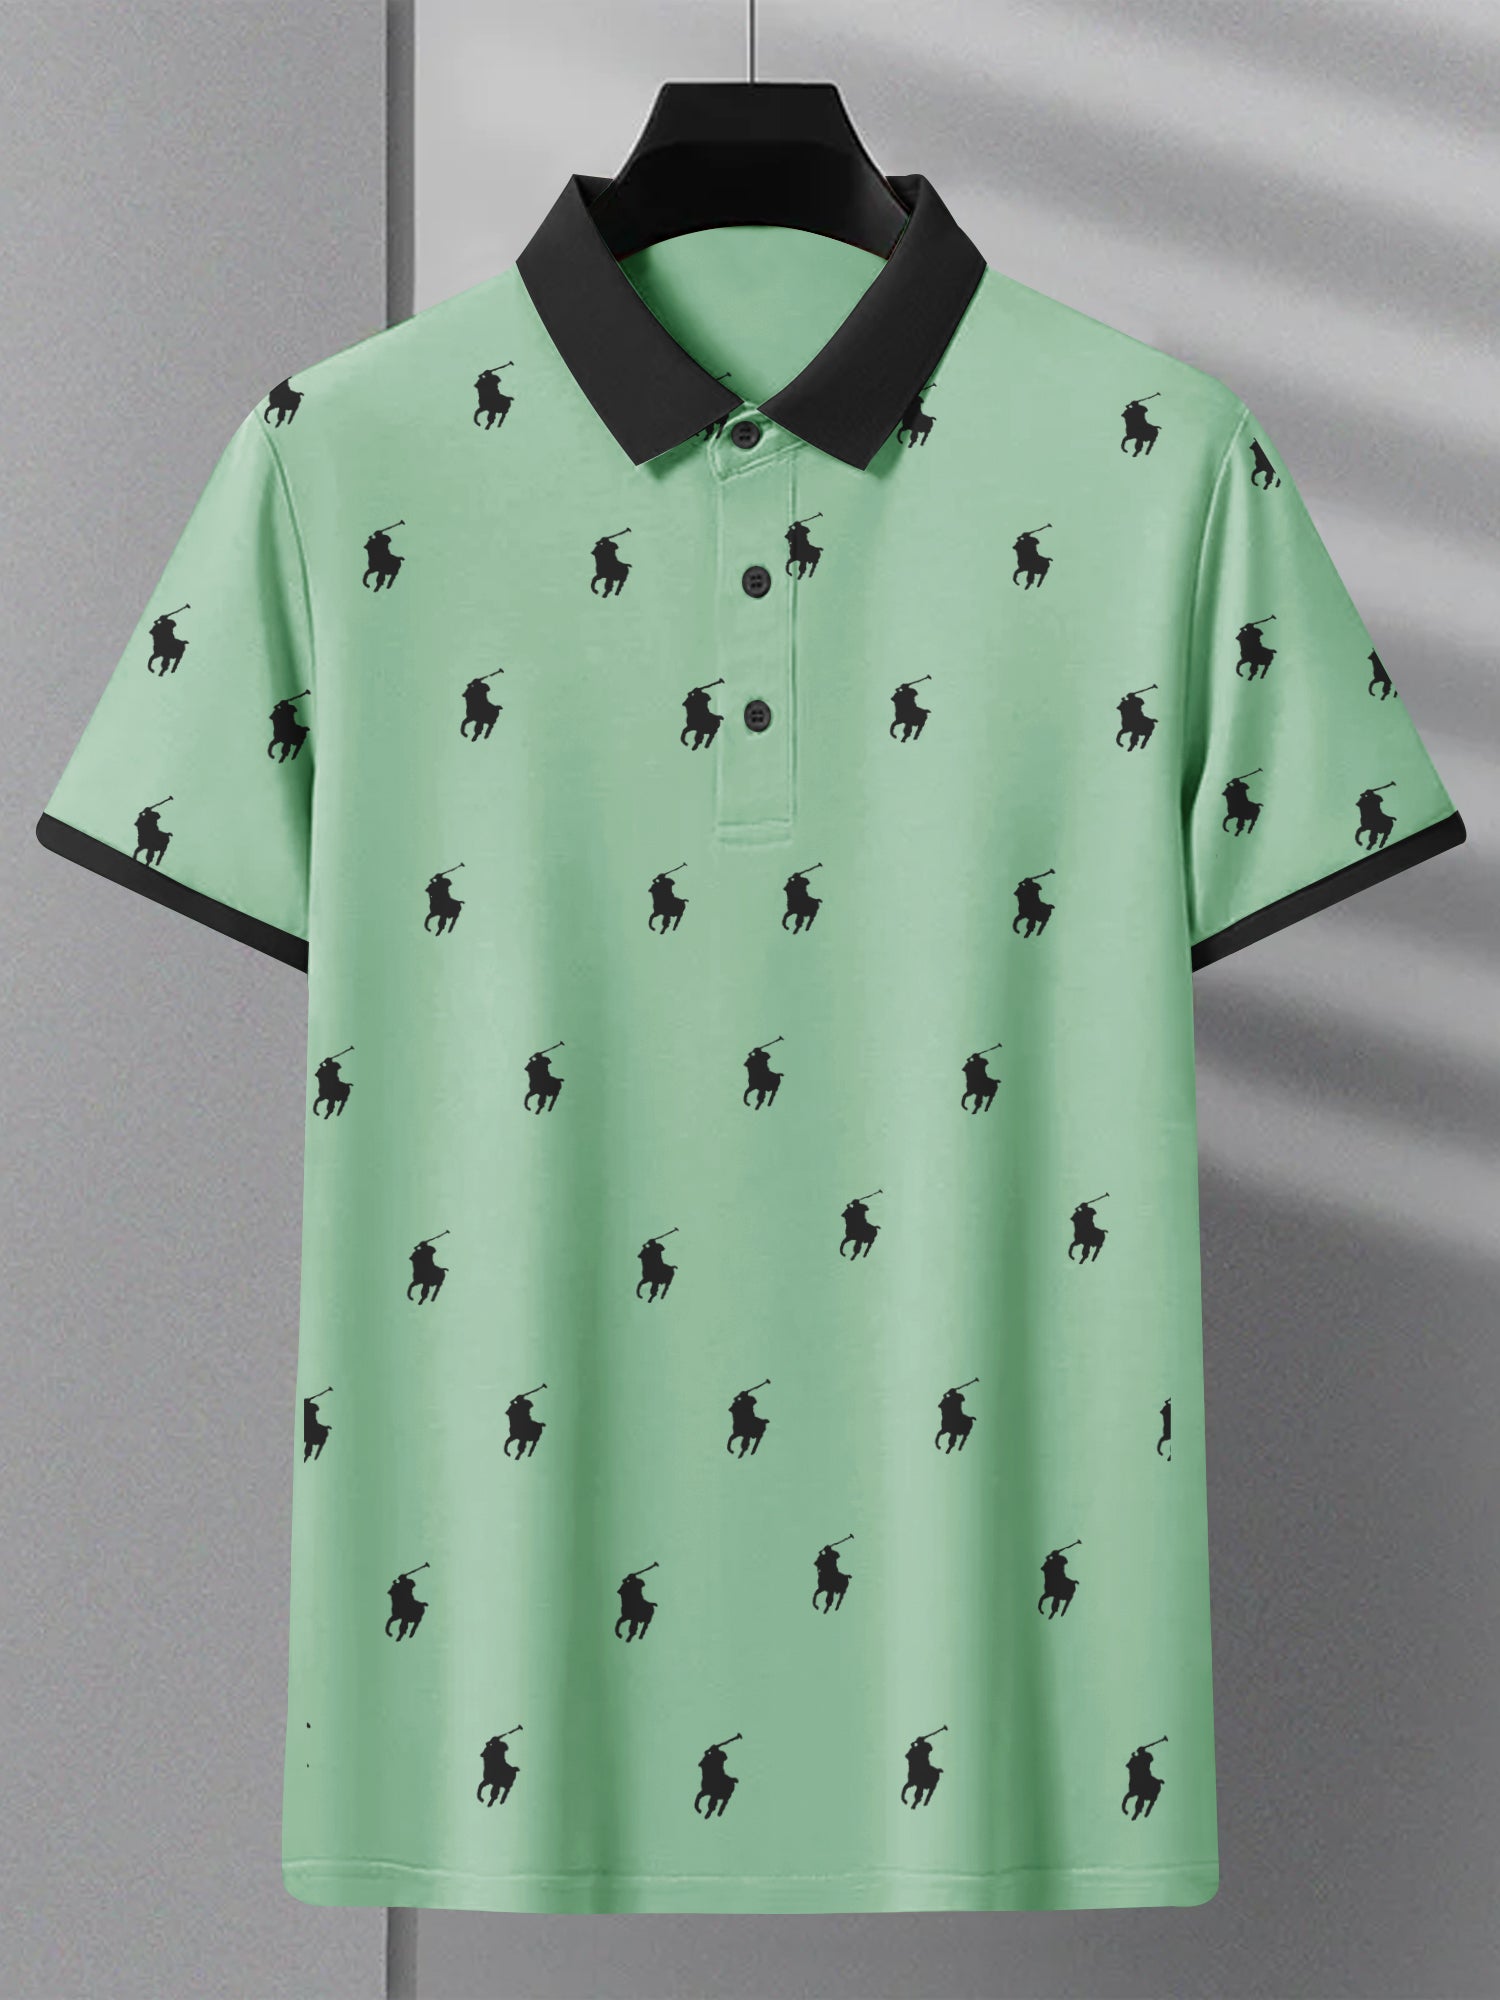 PRL Summer Polo Shirt For Men-Light Green with Allover Print-SP1444/RT2335